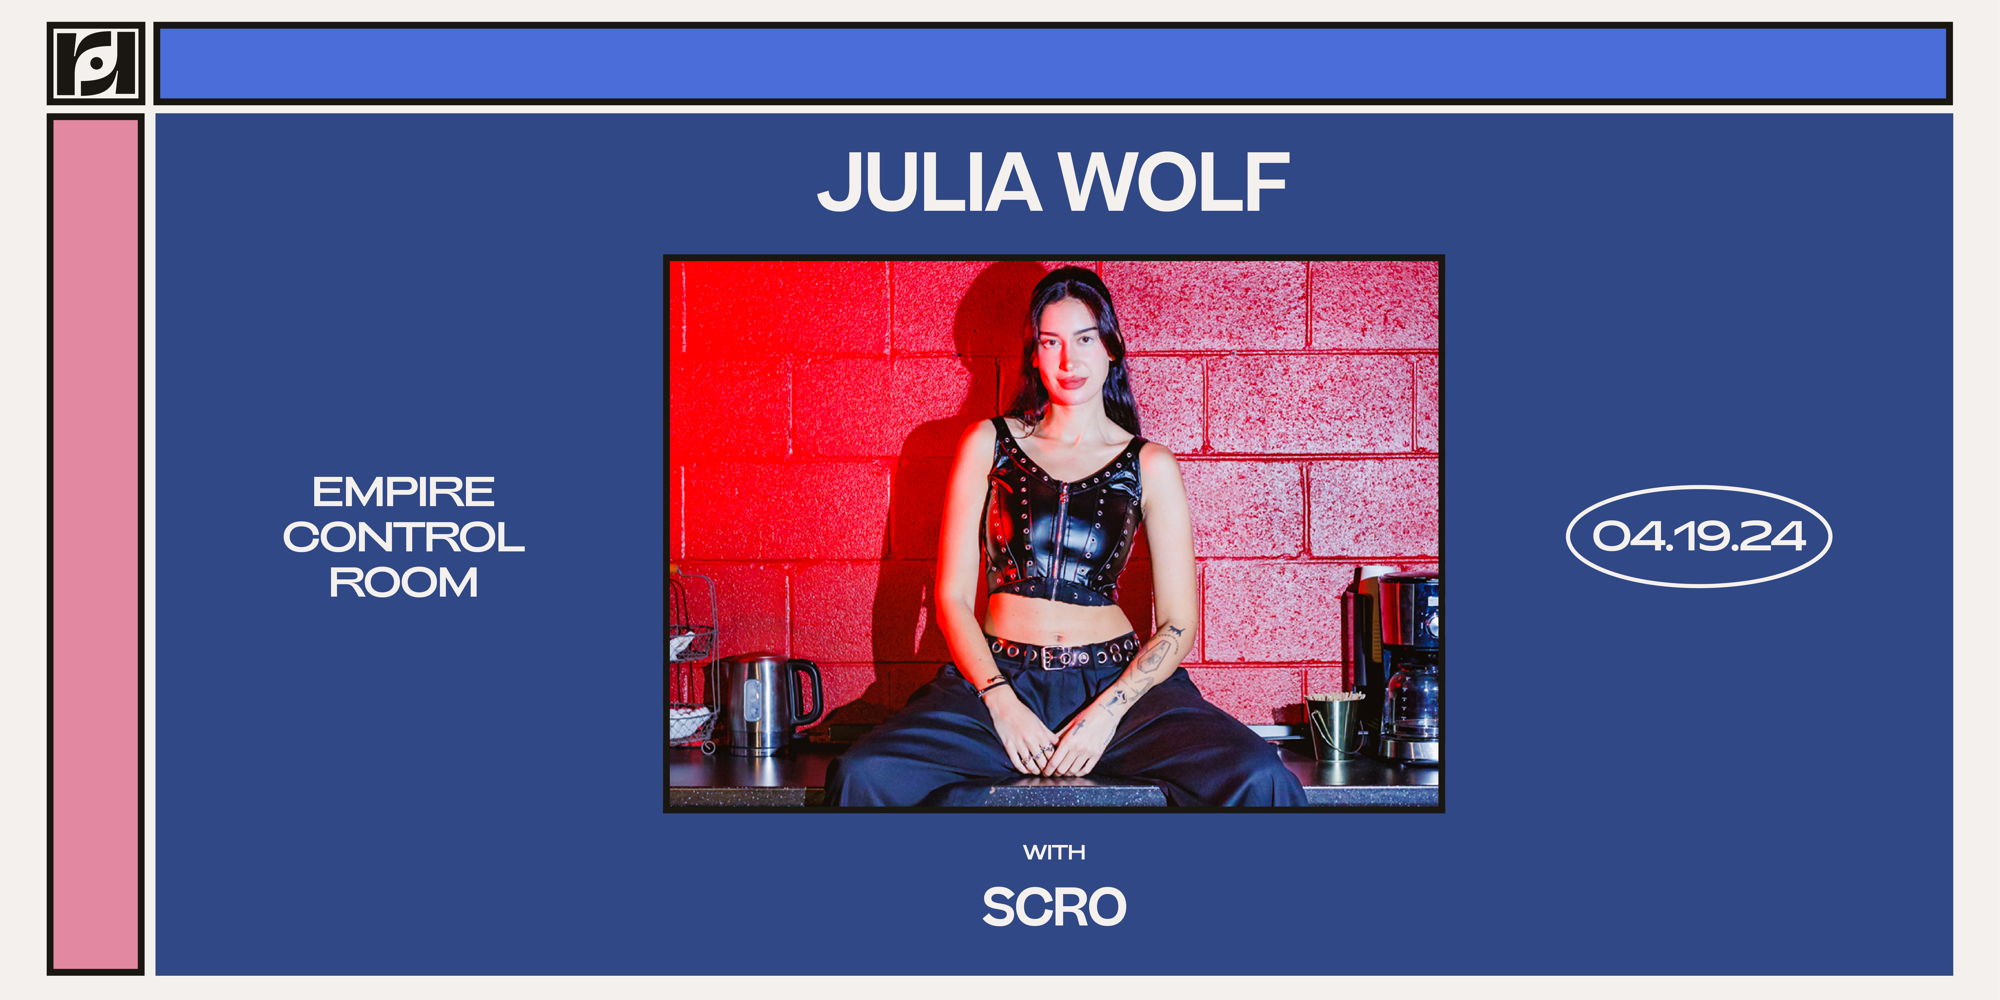 Live Nation + Resound Present: Julia Wolf w/ Scro at Empire Control Room promotional image